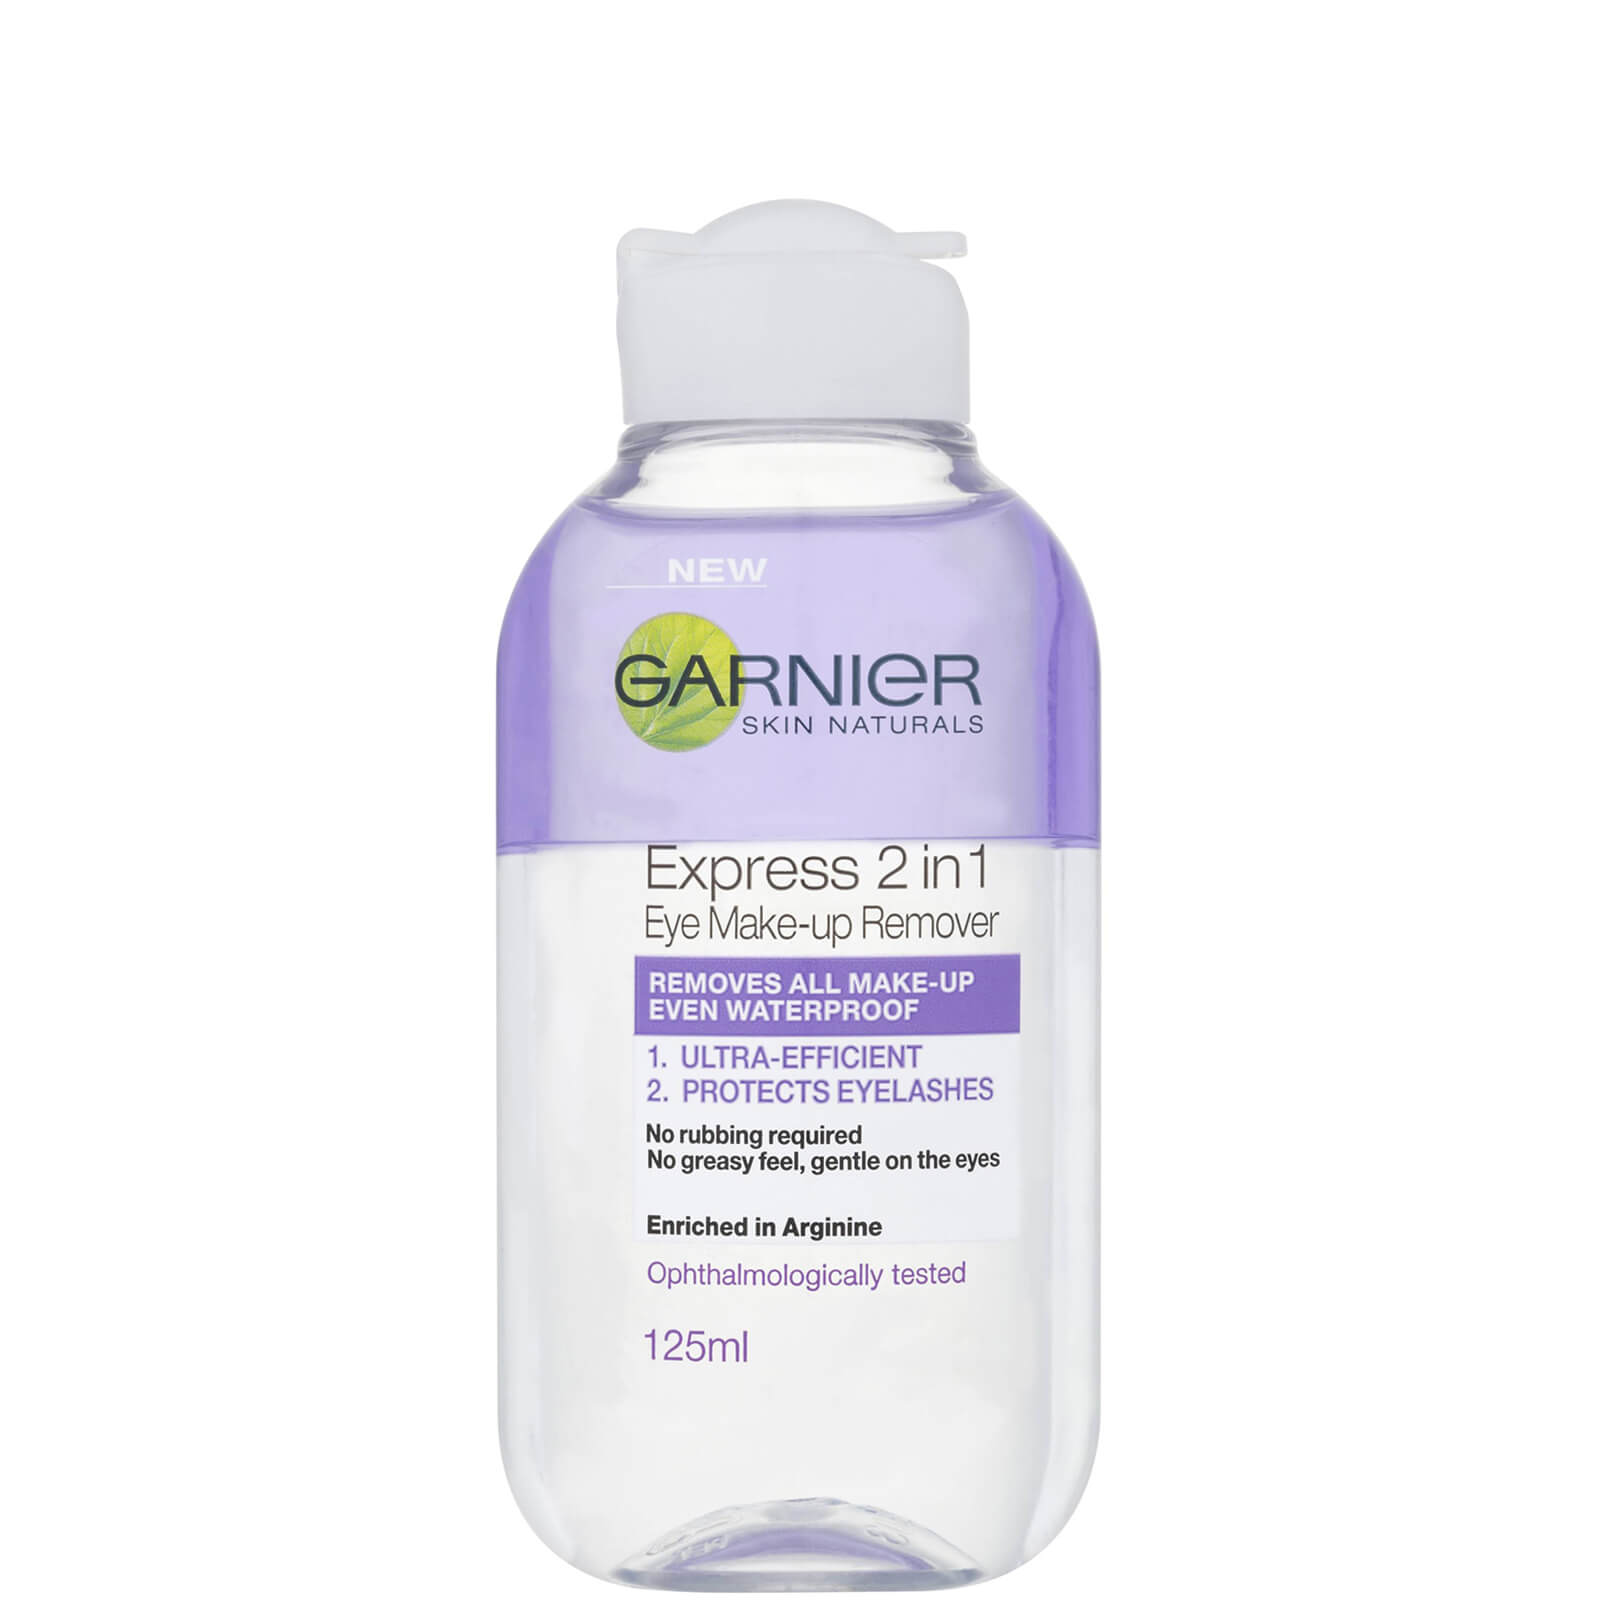 Photos - Facial / Body Cleansing Product Garnier Skin Naturals 2-in-1 Eye Make-Up Remover  C4987950 (125ml)